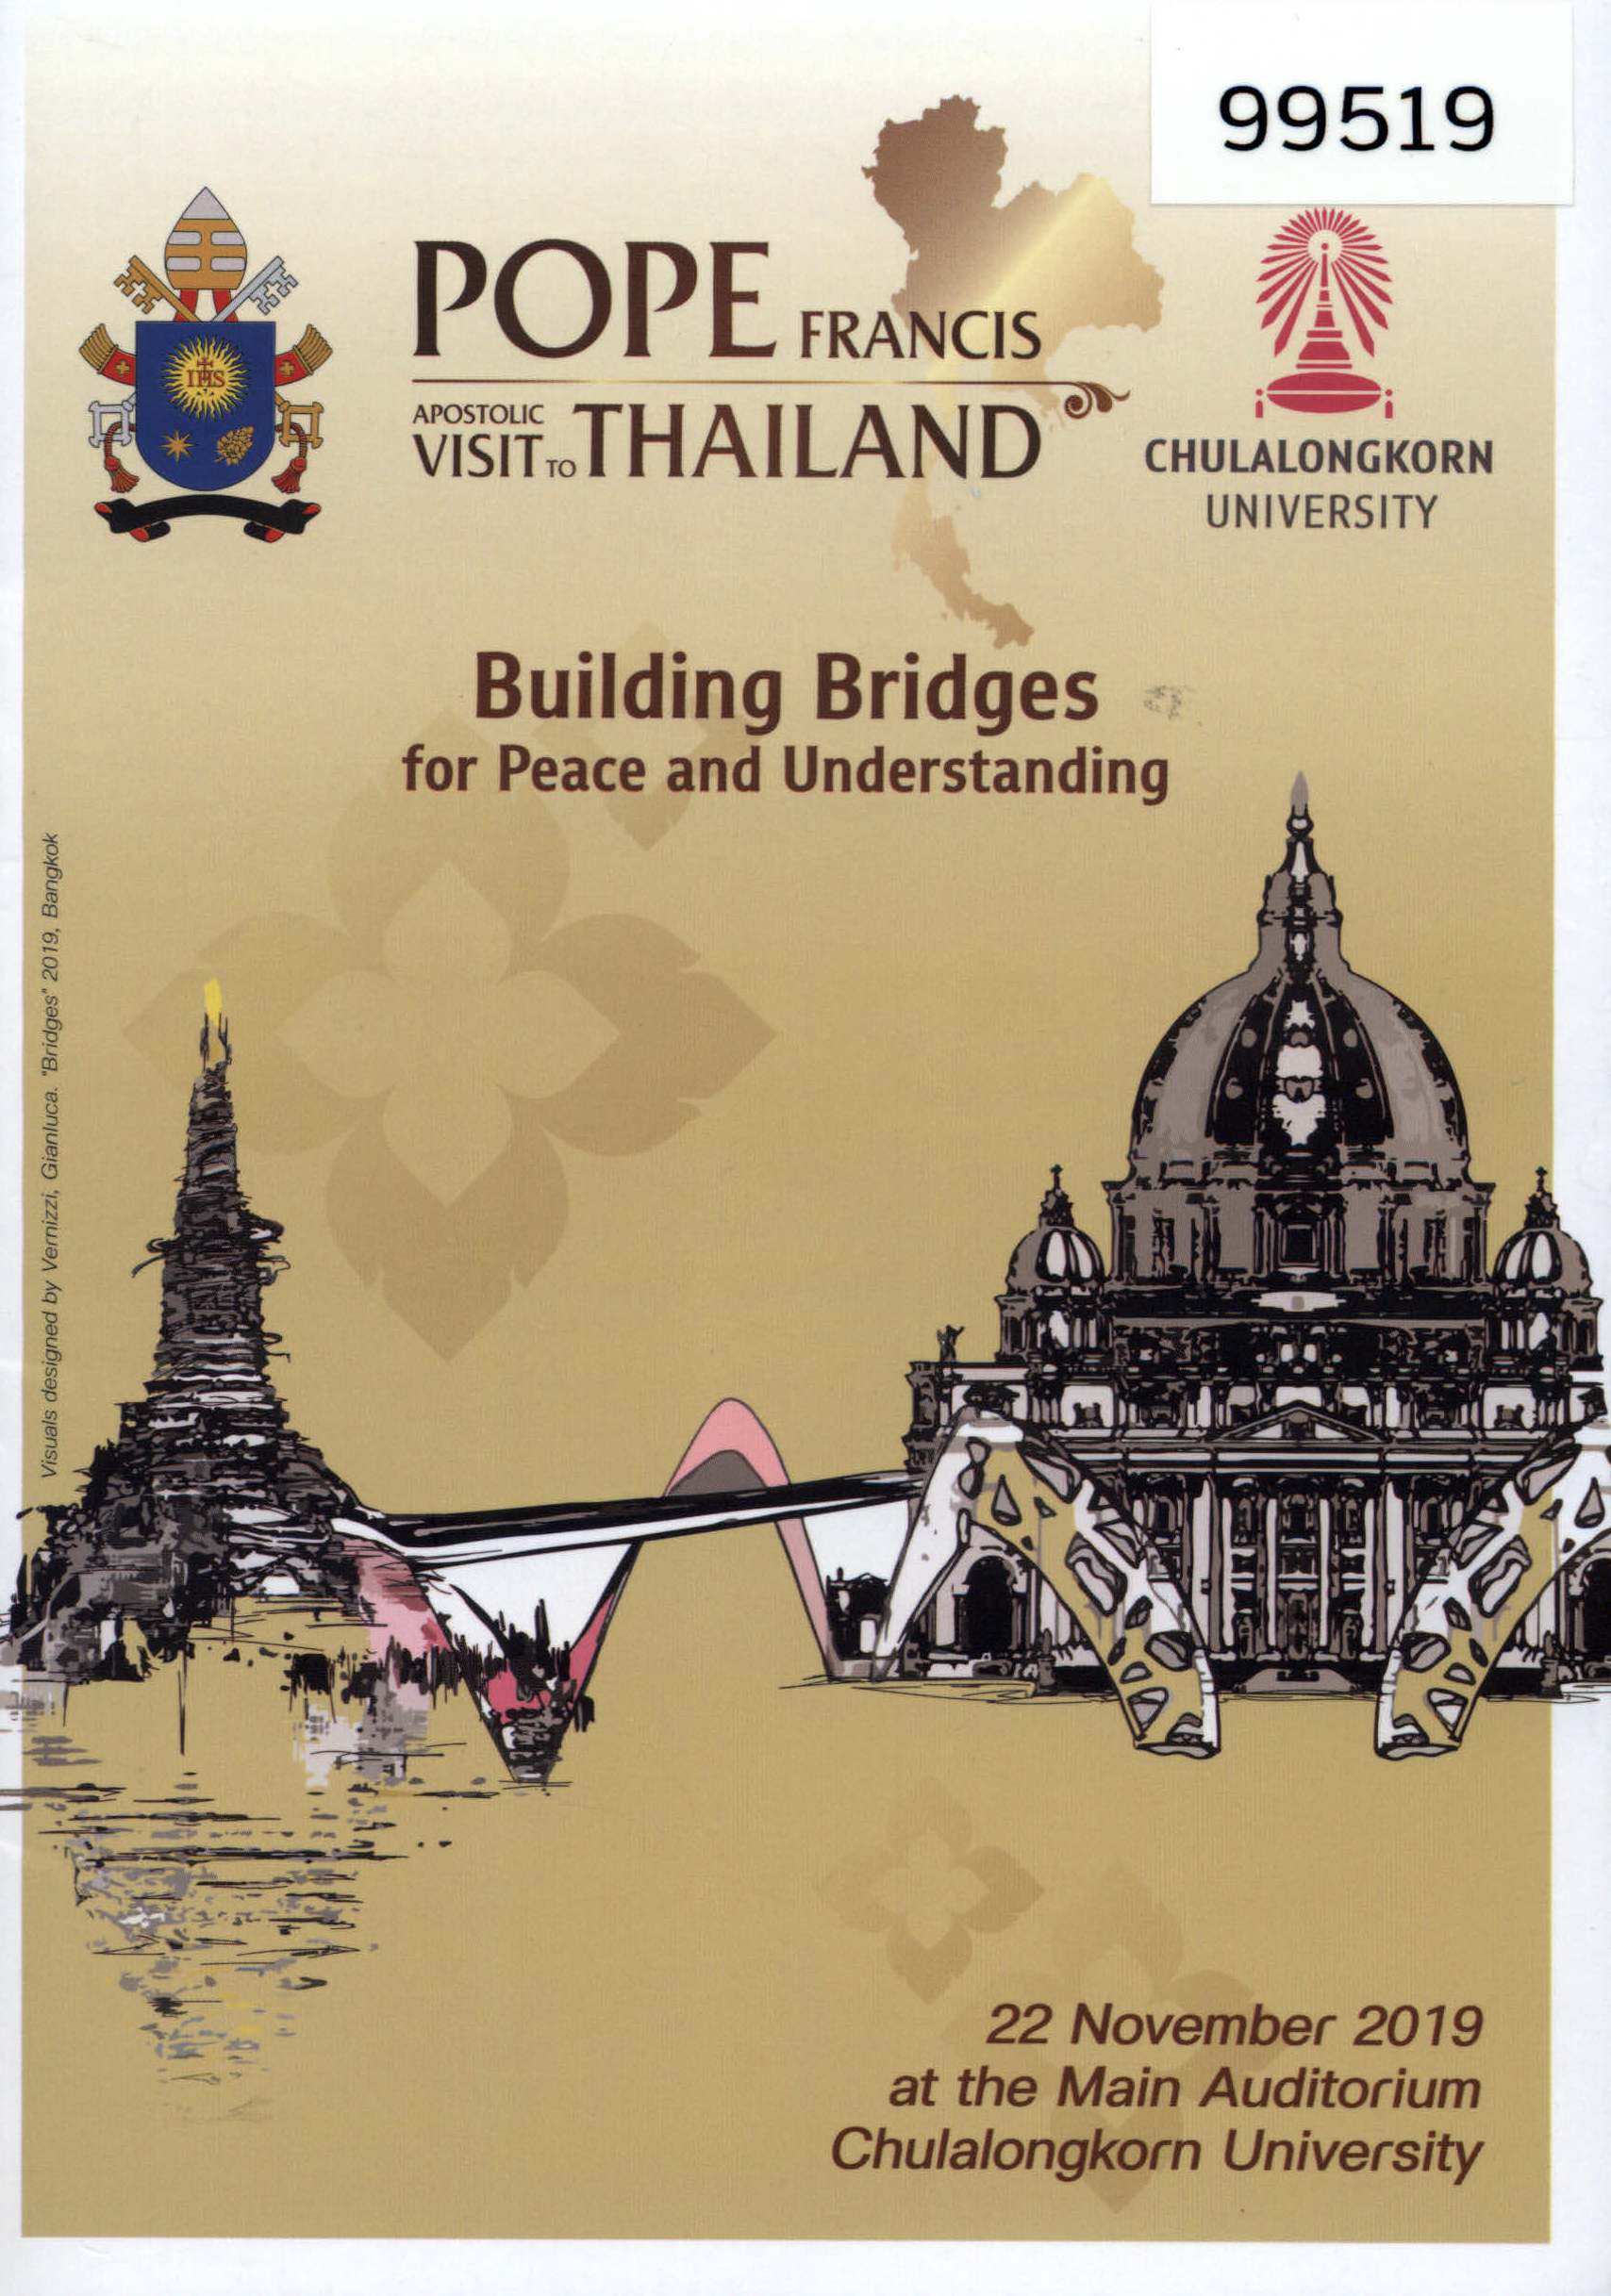 Pope Francis Apostolic Visit to Thailand: Building Bridges for Peace and Understanding